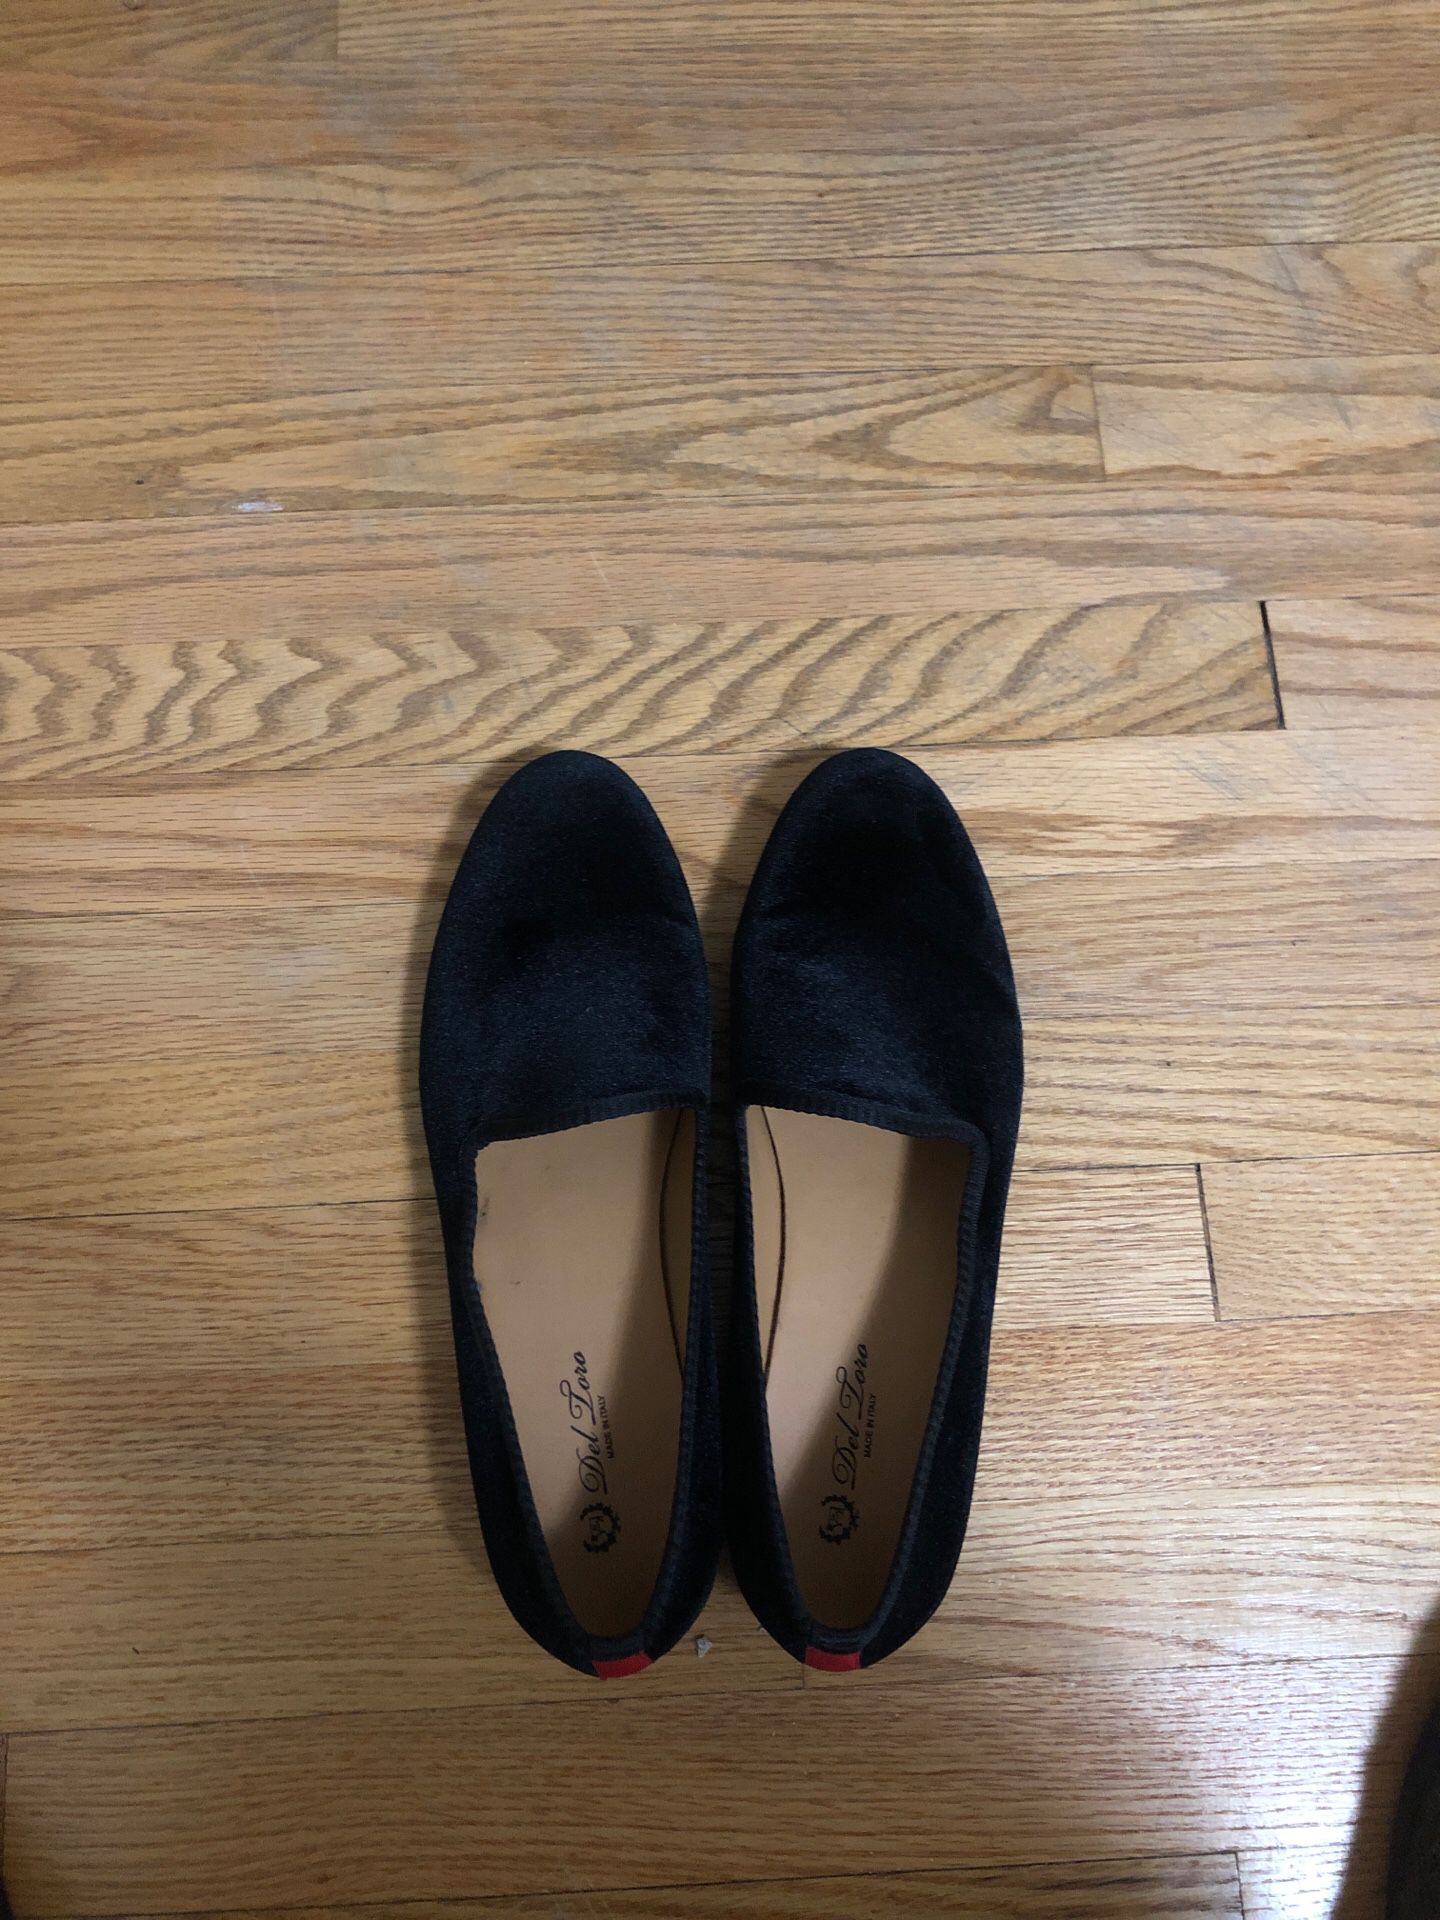 Del Toro Black suede loafers. Size 13. Price is negotiable.